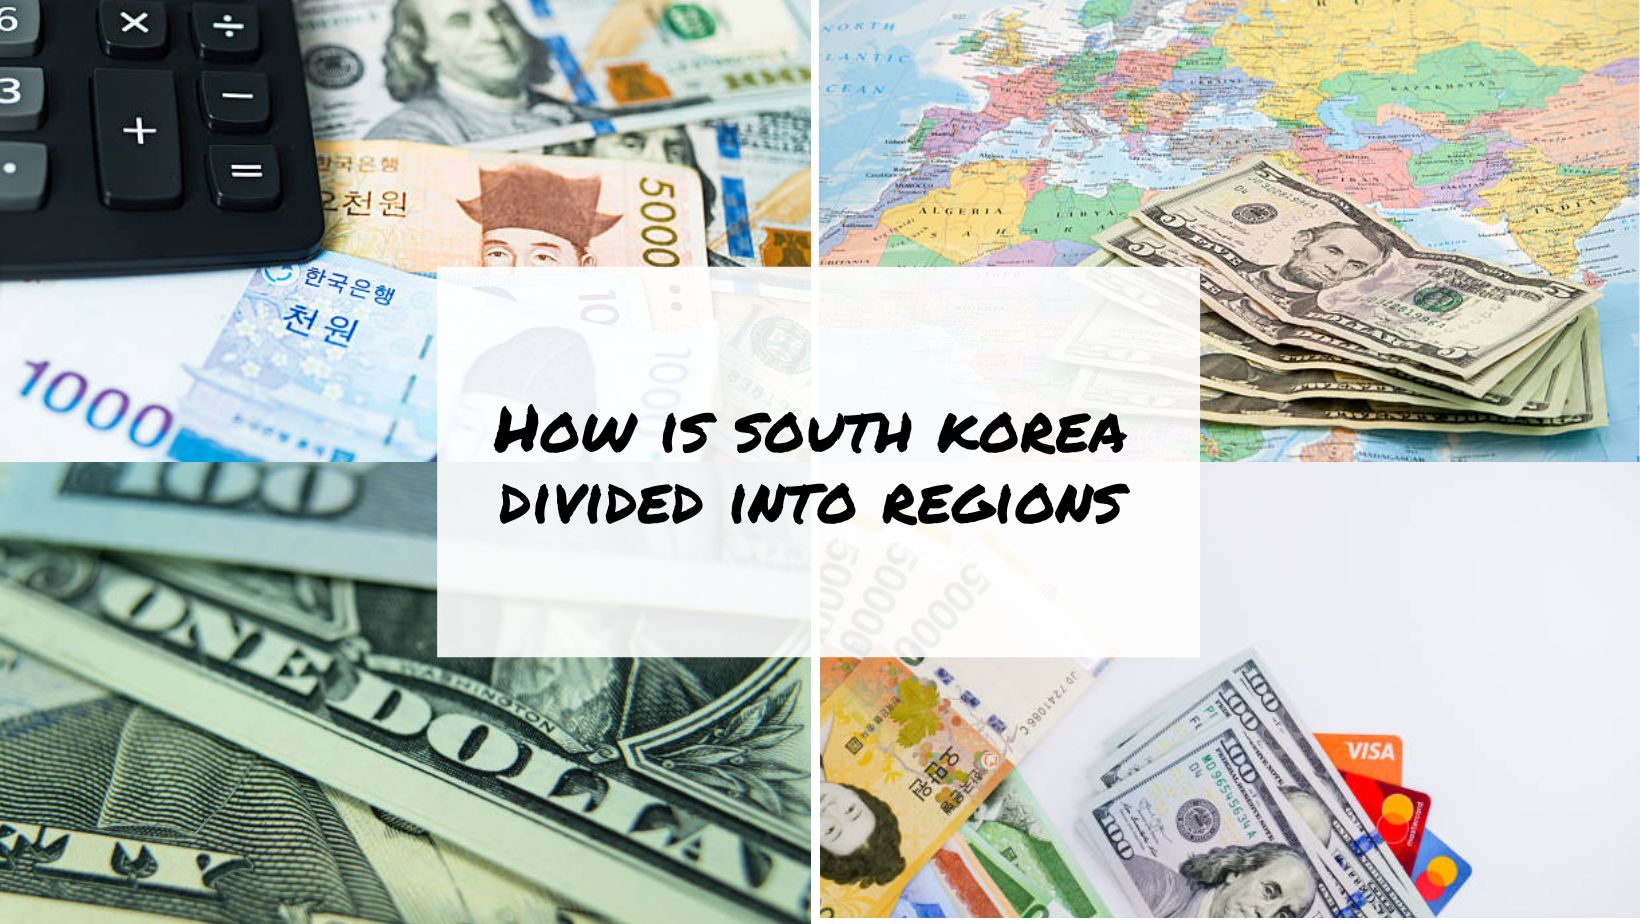 How is south korea divided into regions